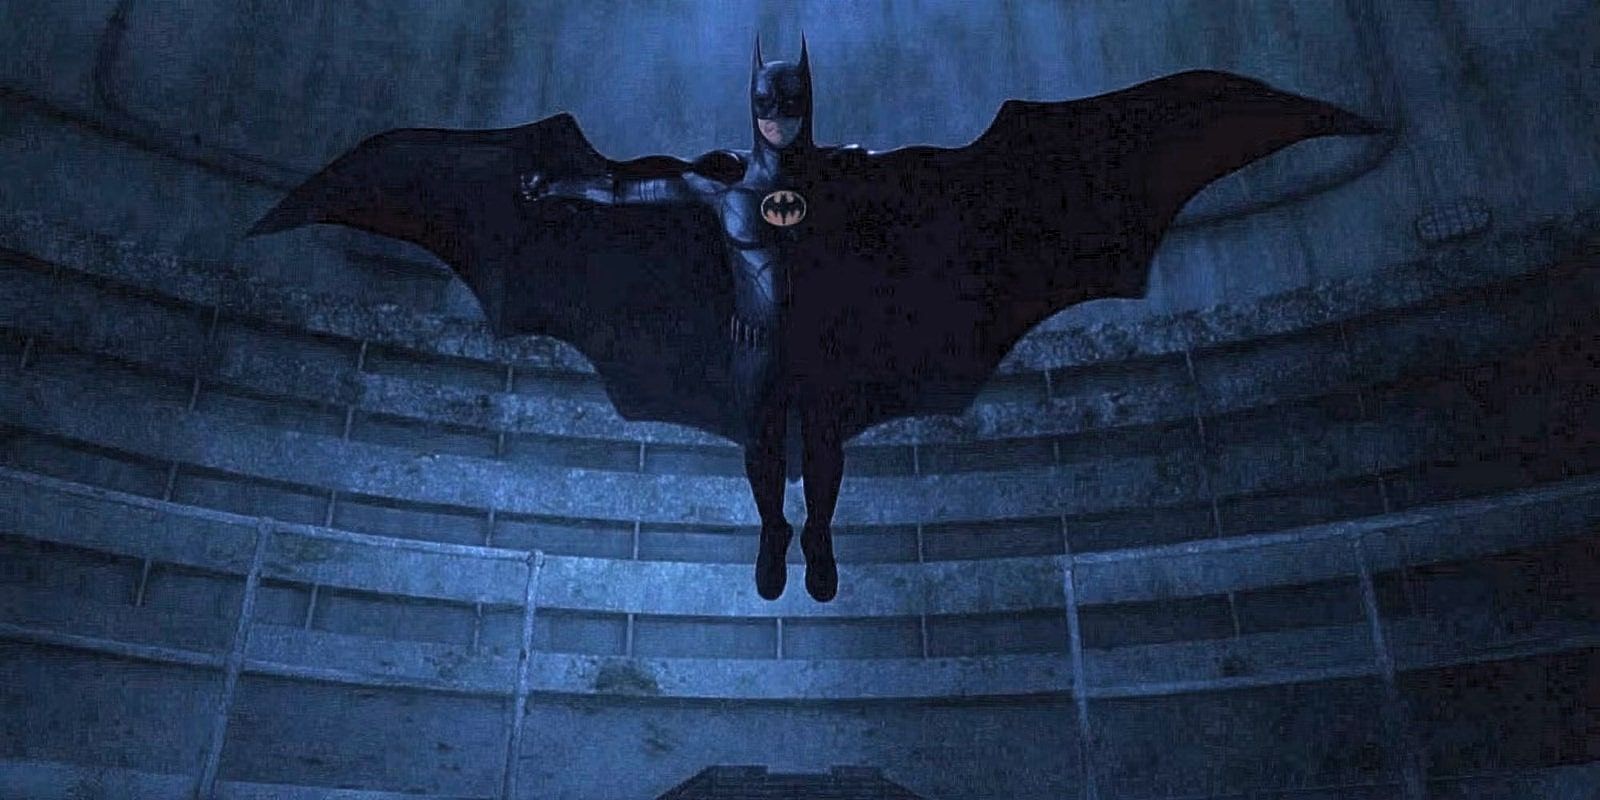 Michael Keaton's Batman with his wings up in The Flash.